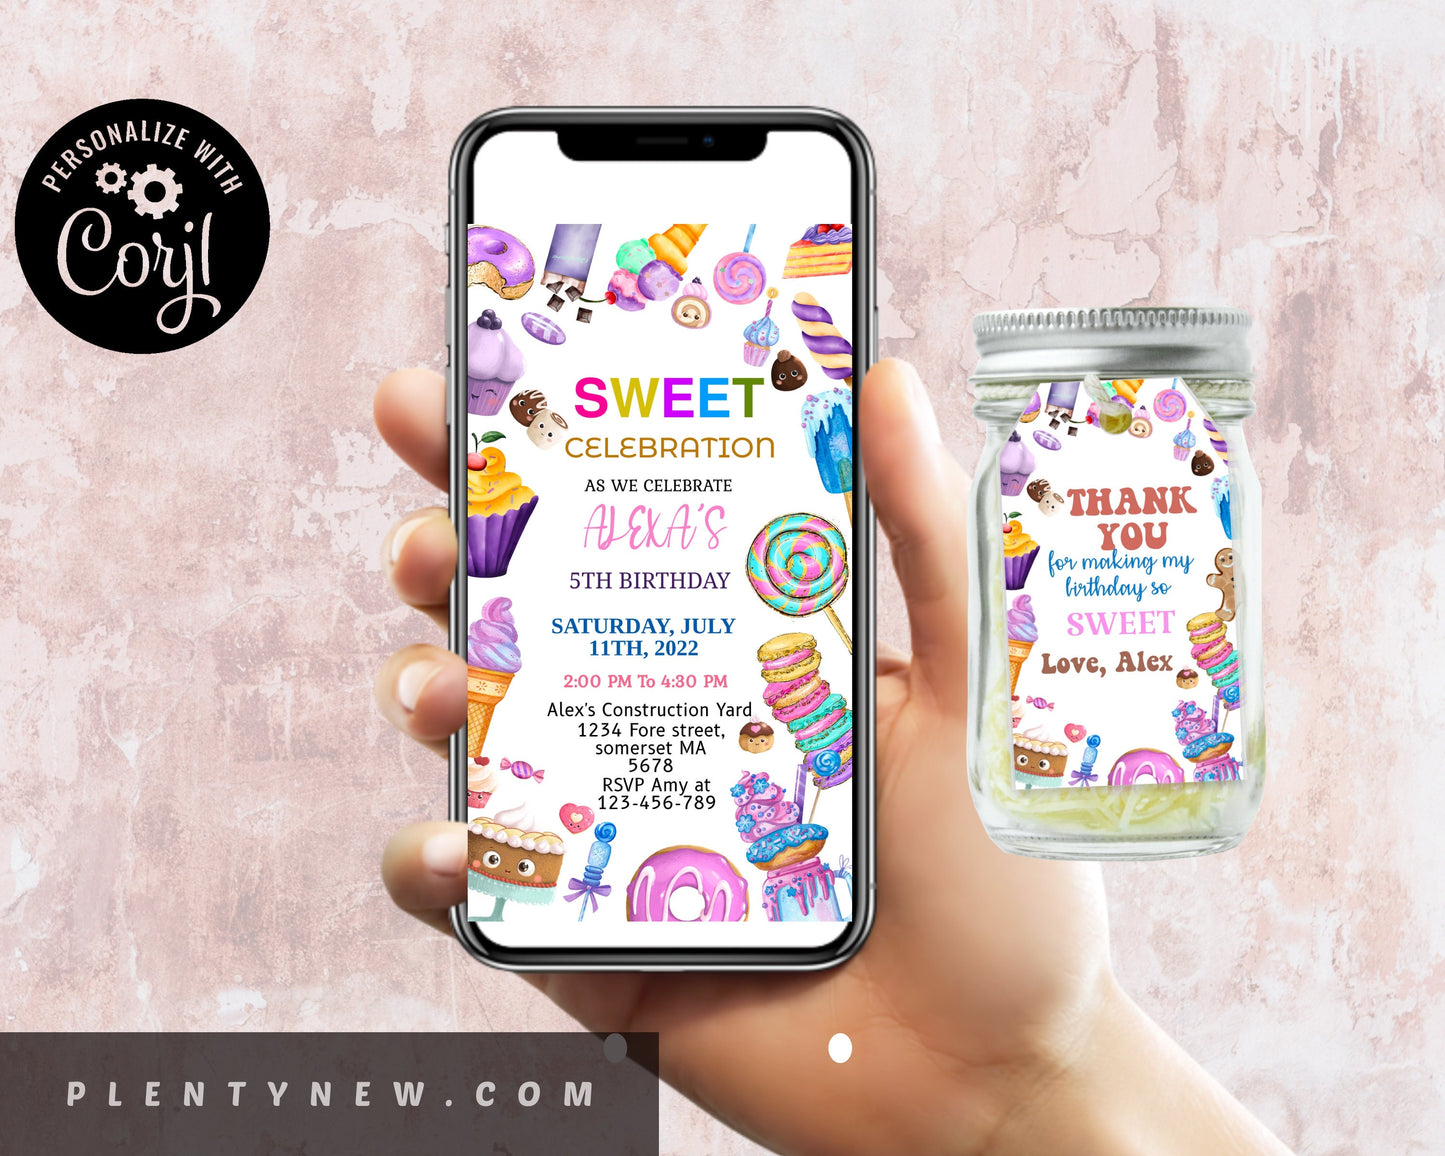 Sweets Candy Electronic Invitation Template, Sweet Candy Birthday Phone Invitation, Electronic Invitation, Sweet Celebration Birthday , IC